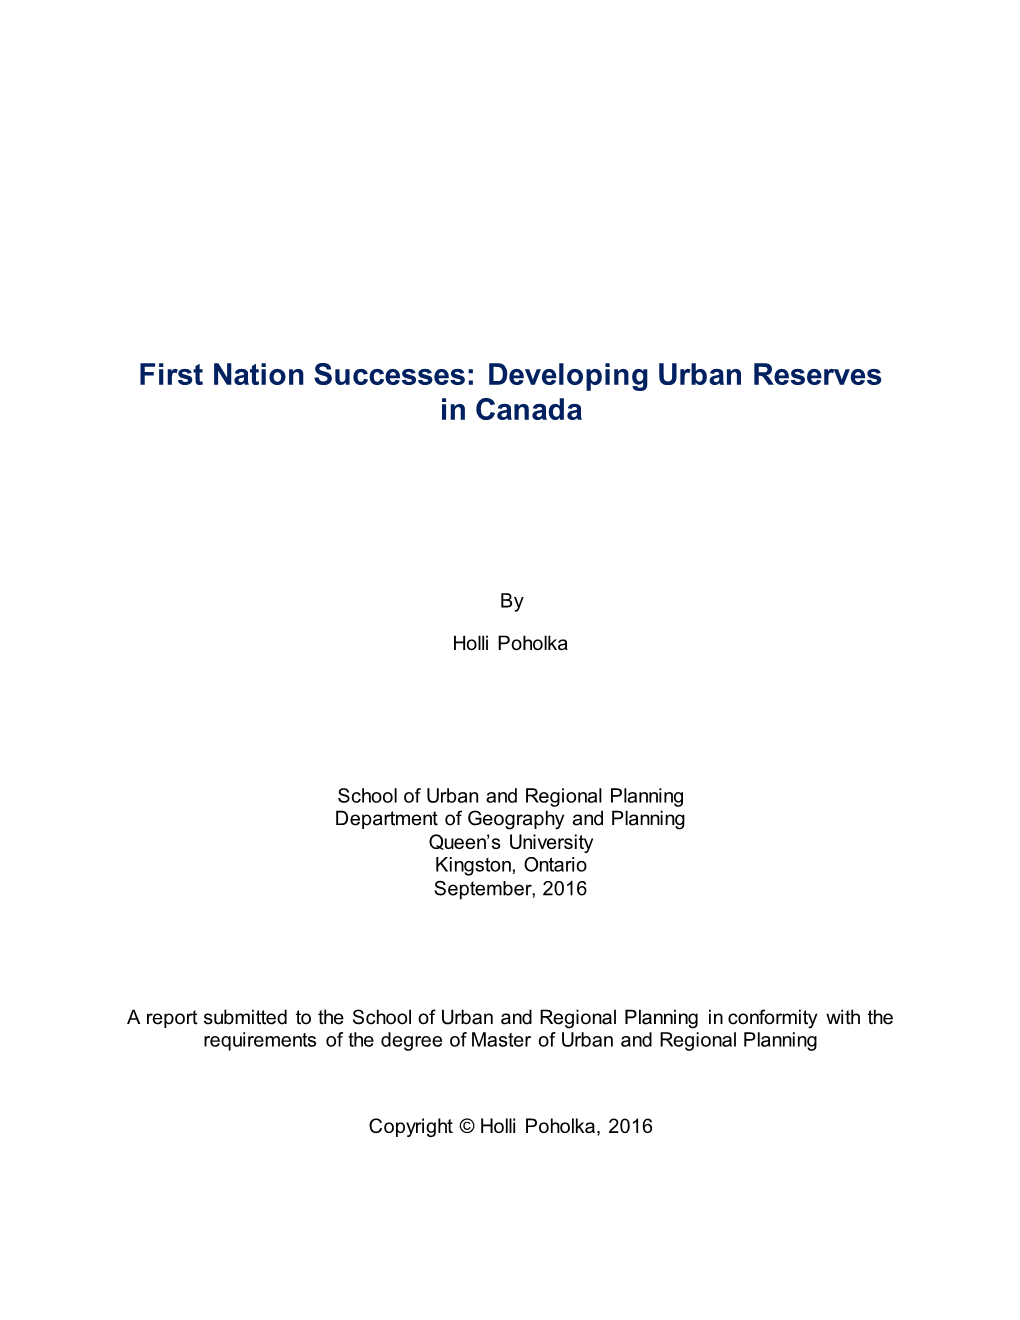 First Nation Successes: Developing Urban Reserves in Canada